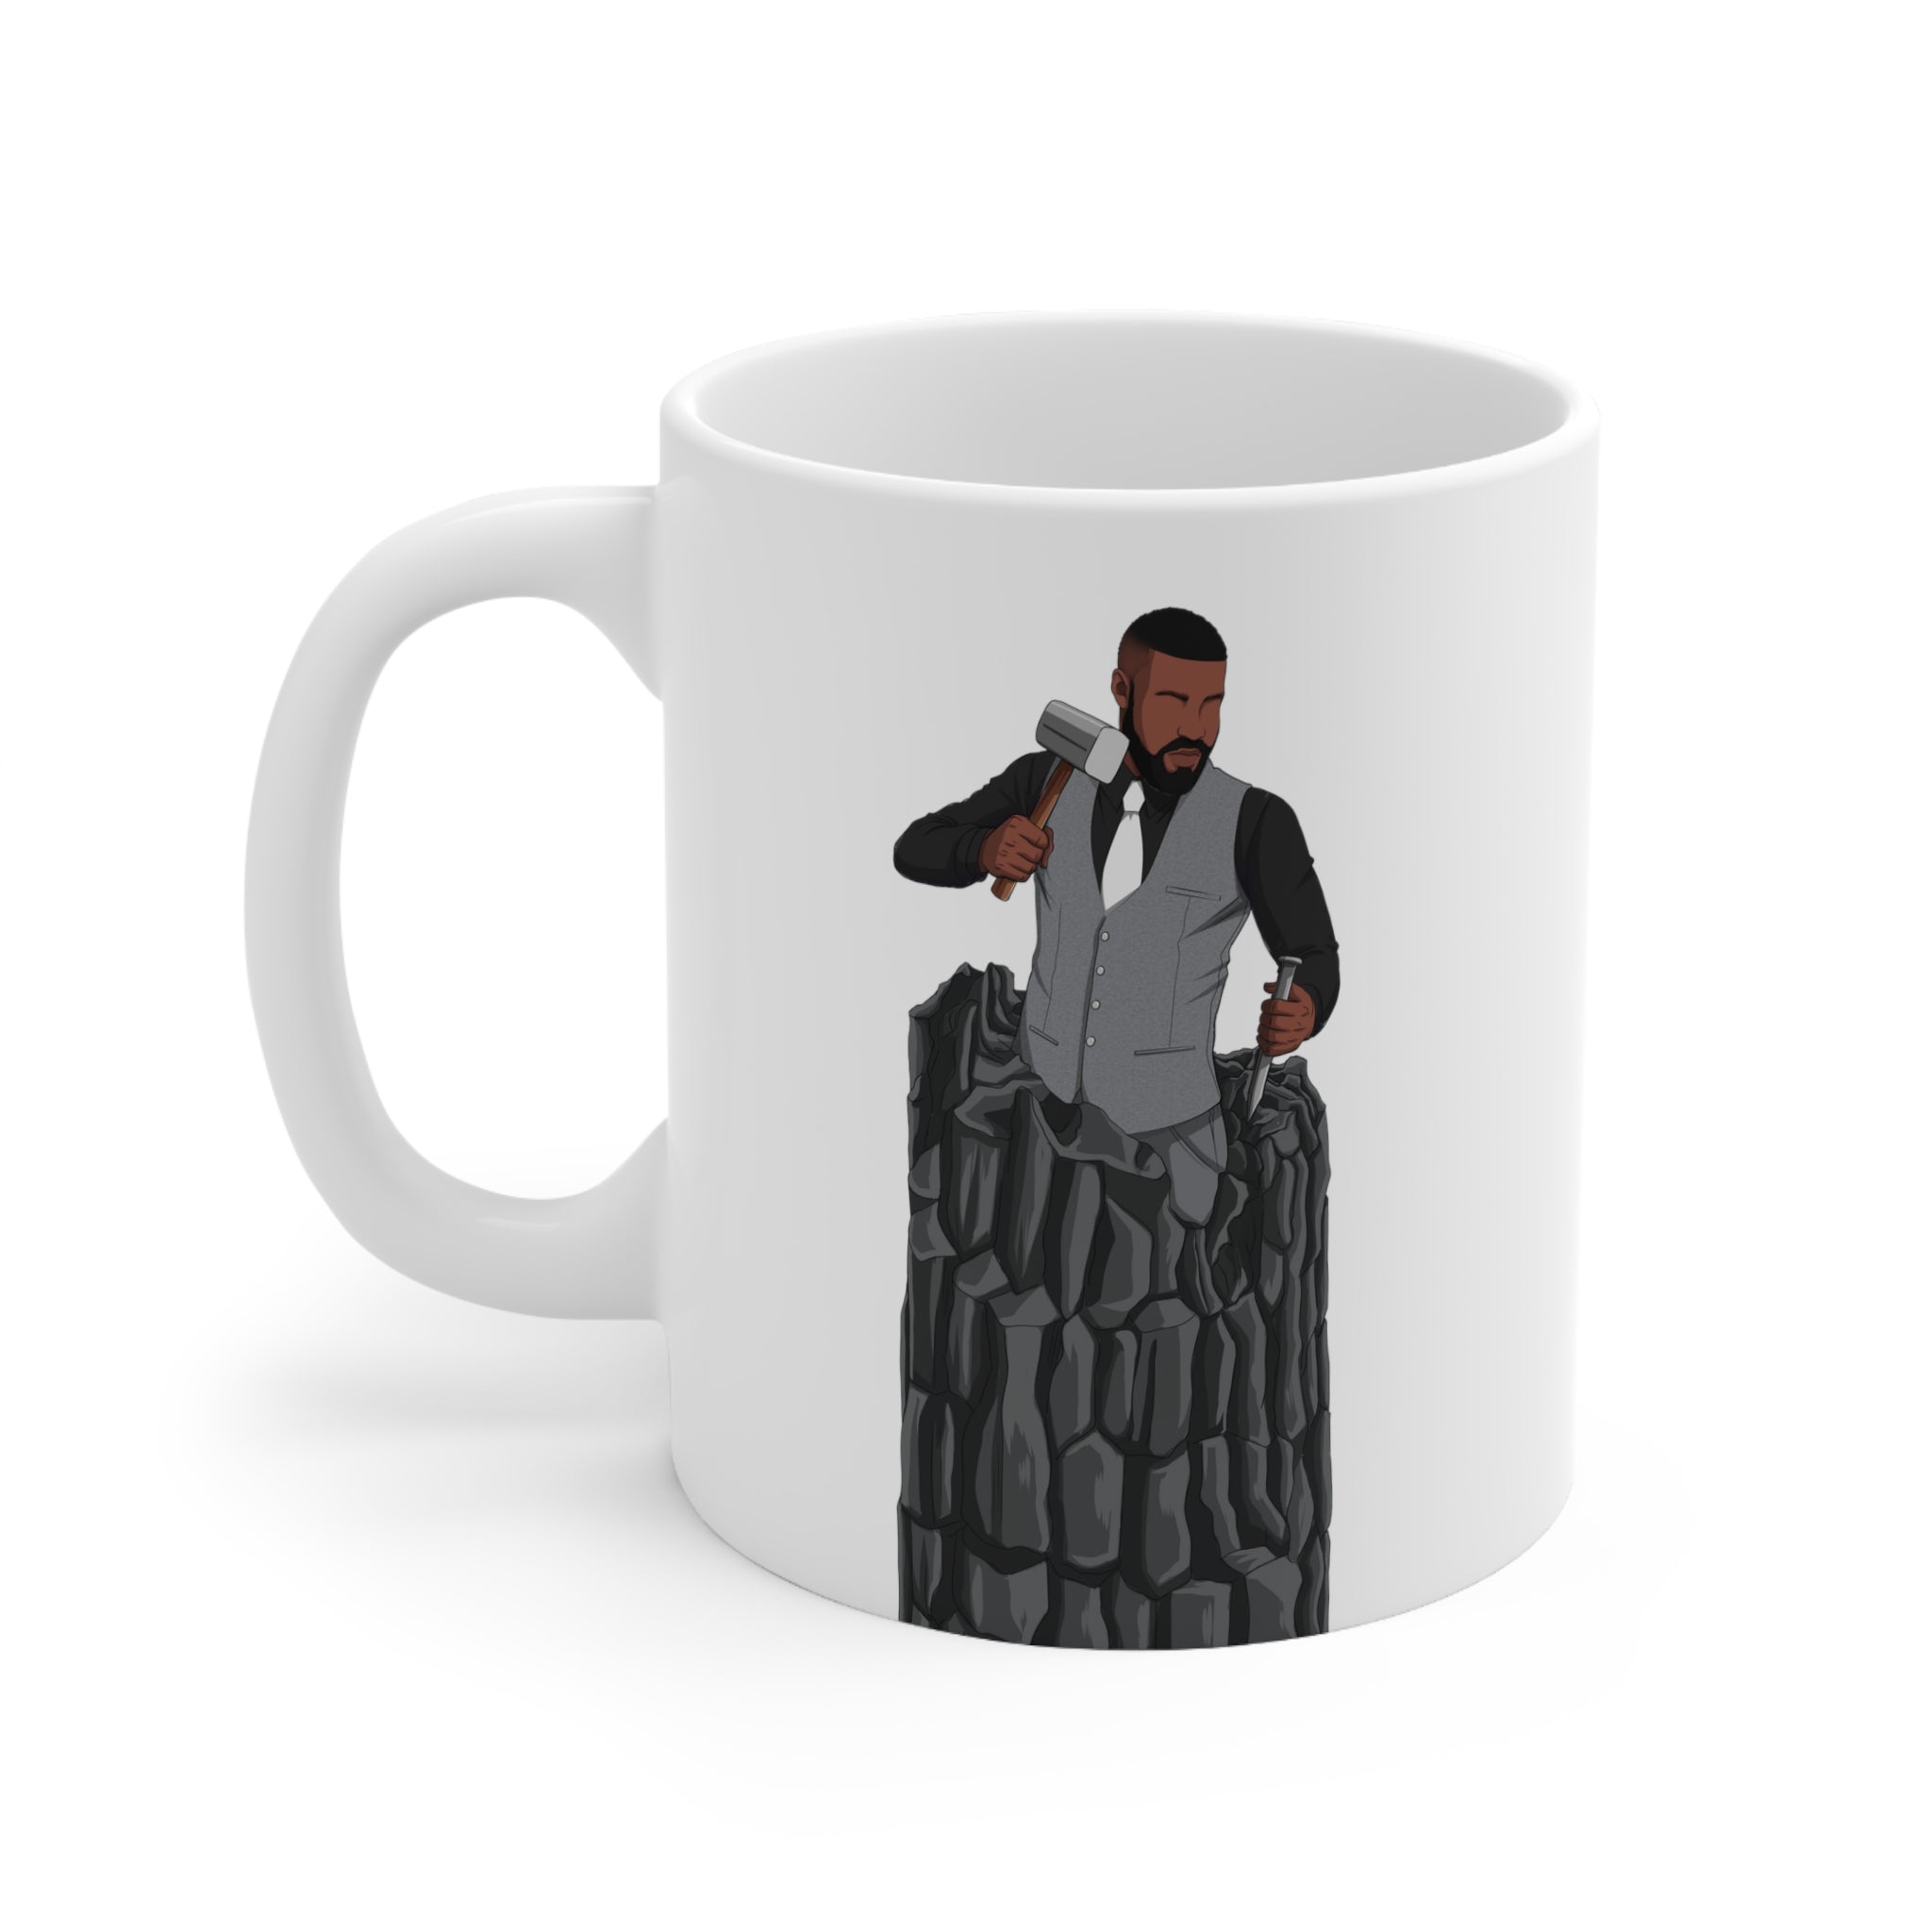 A person working hard to better his/herself - Ceramic Mug 11oz - Self-Made Man #6 - Breakthrough Collection